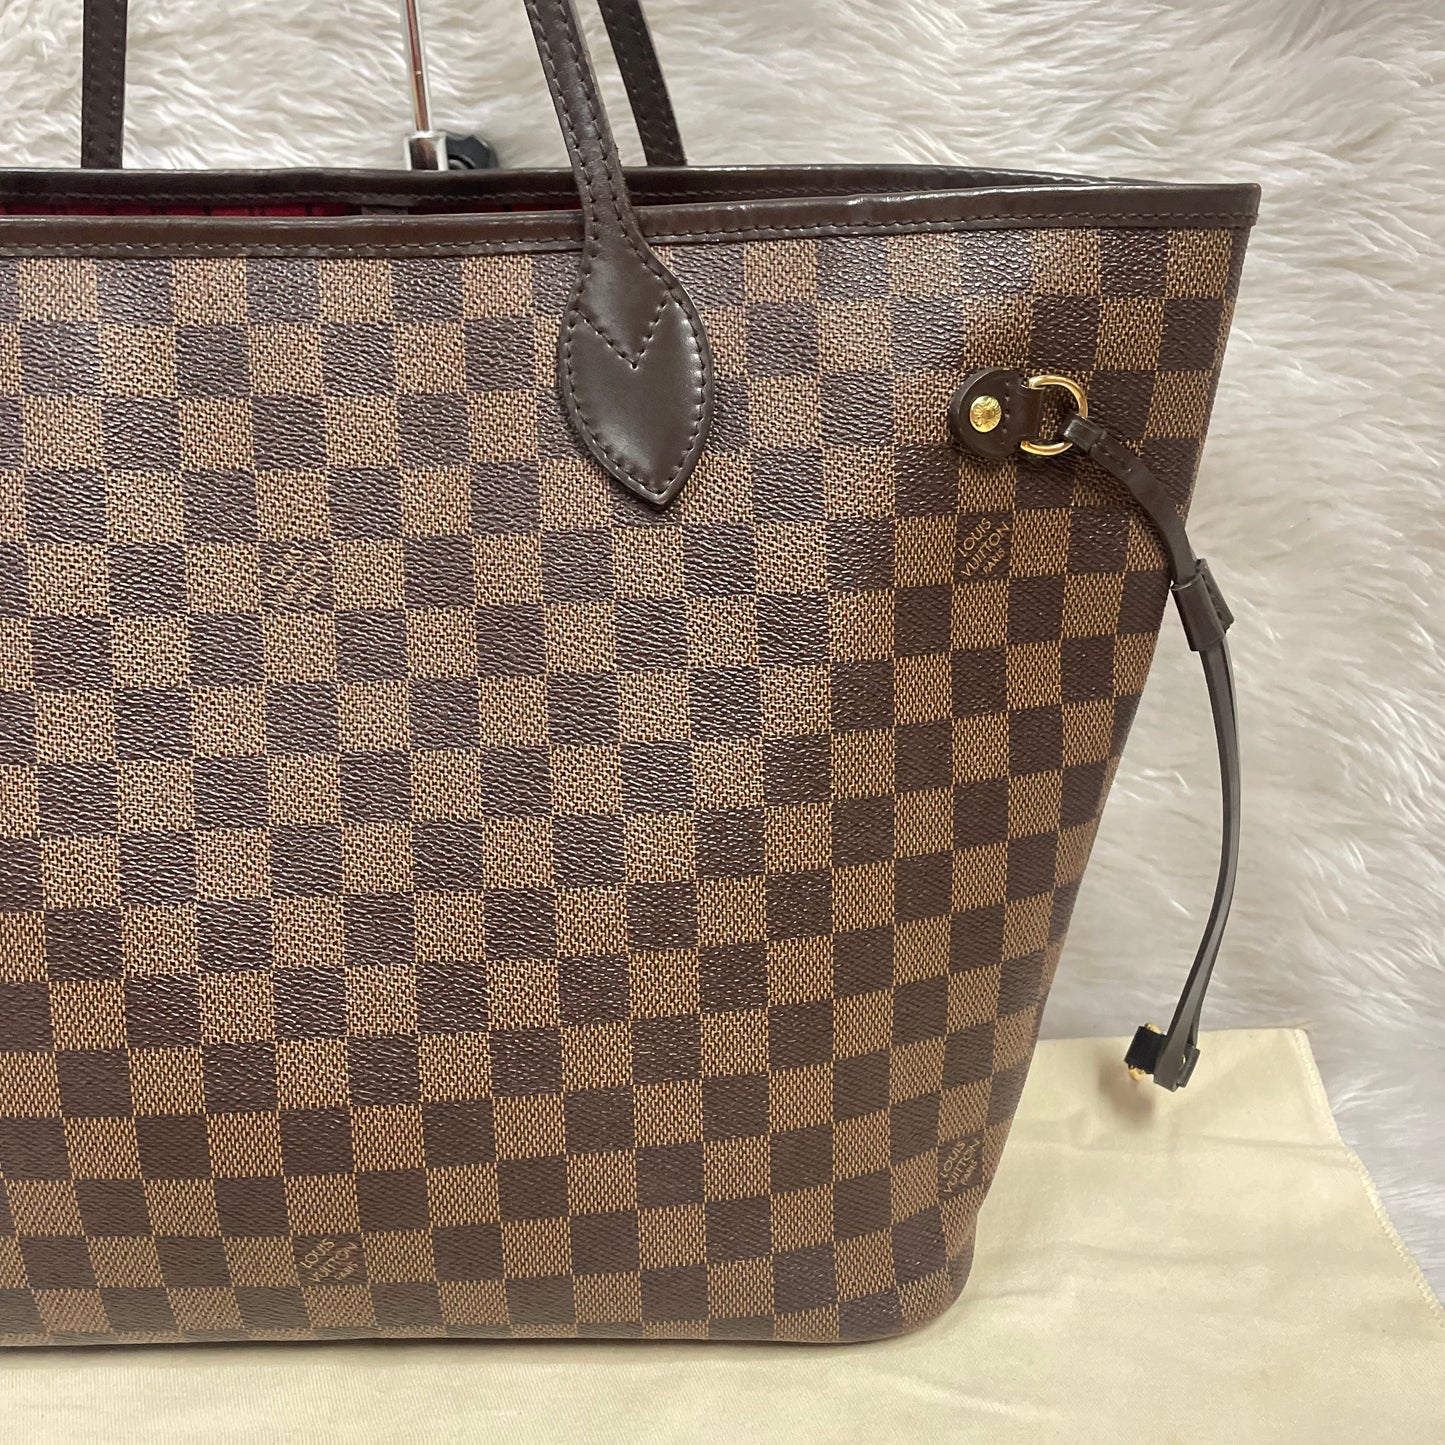 Authentic Neverfull mm damier ebene in very great condition